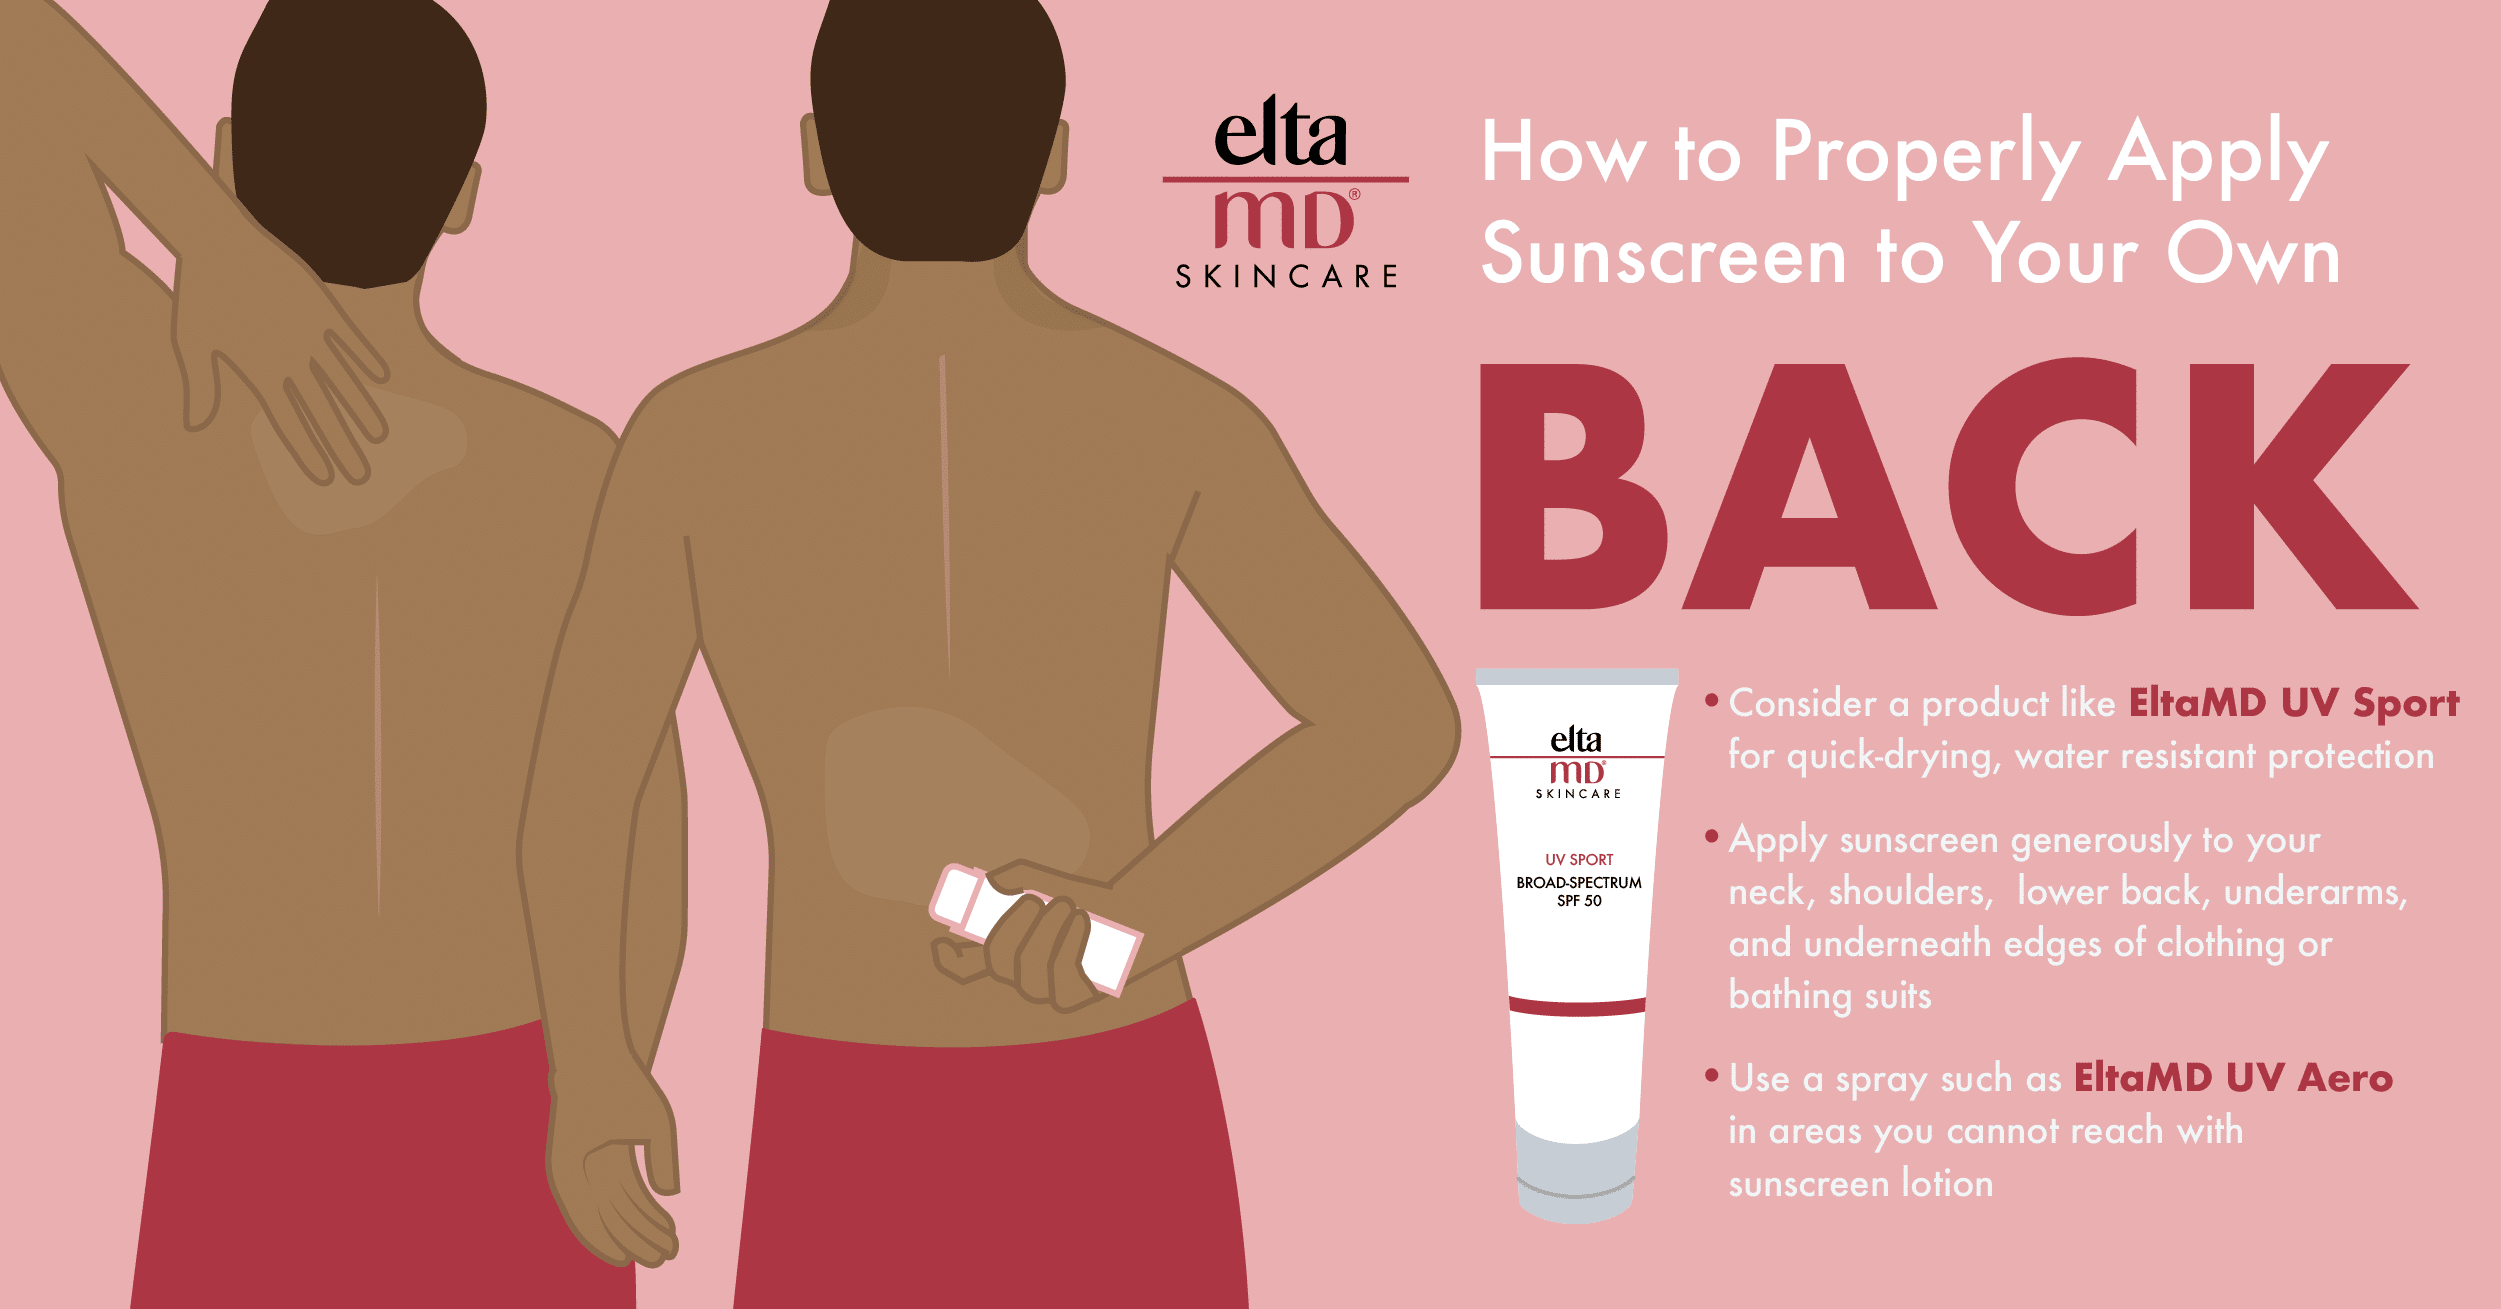 How to properly apply sunscreen to your own back